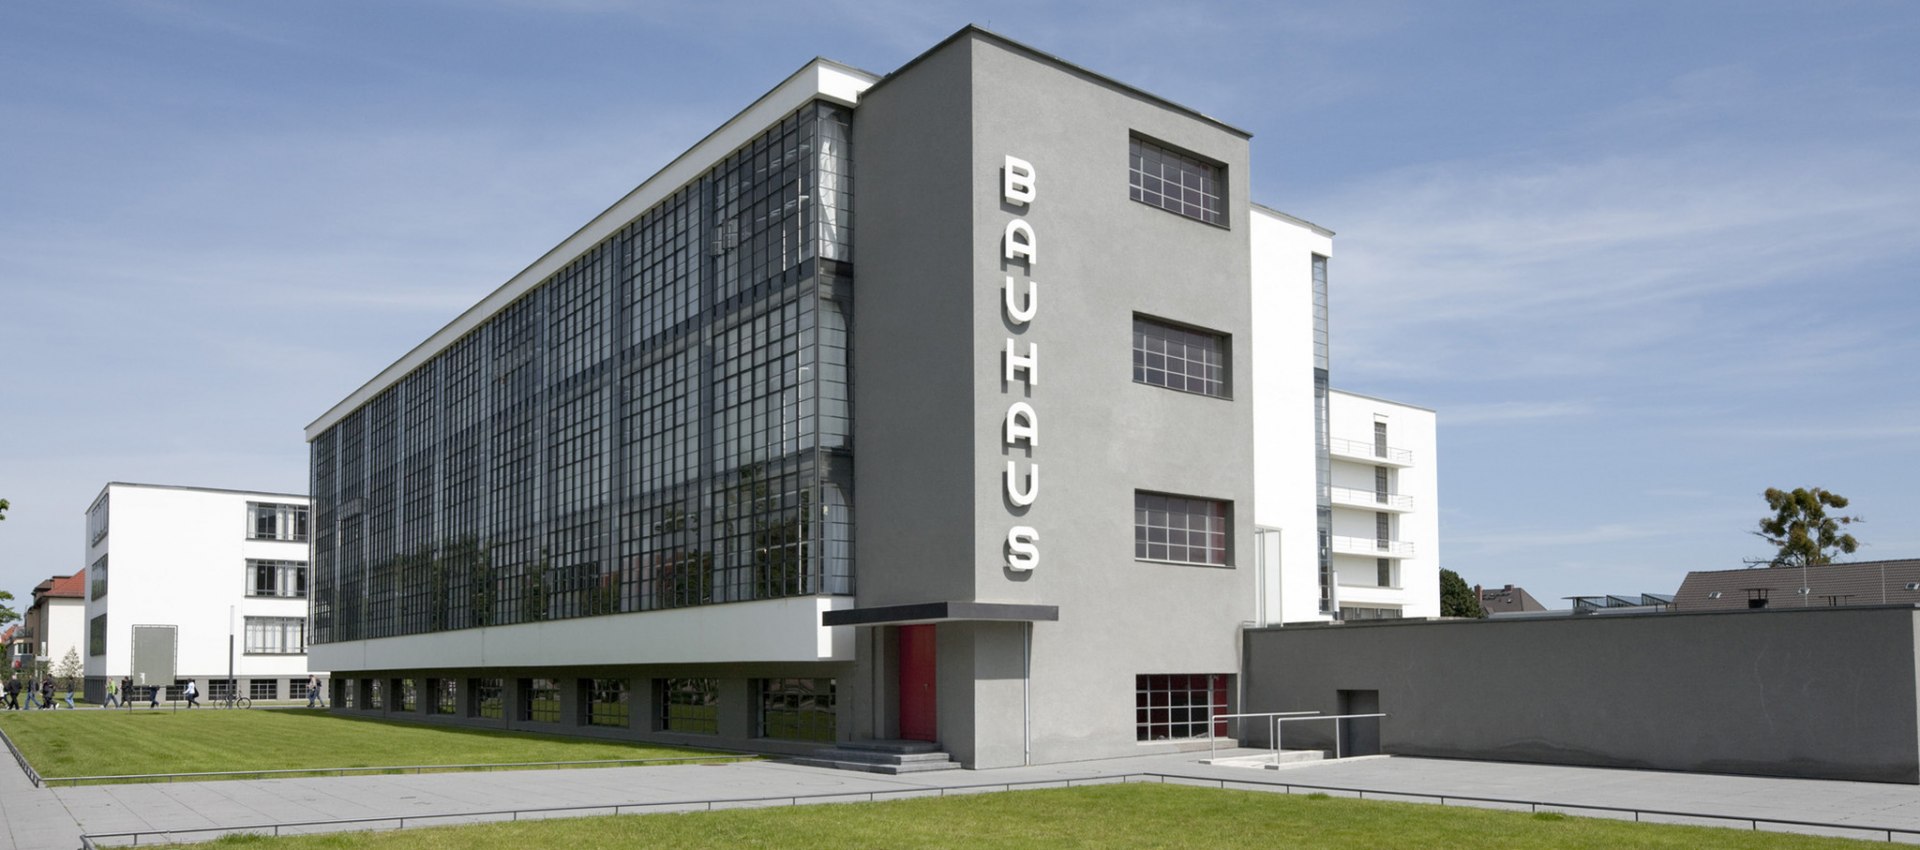 Open Letter To The Bauhaus Dessau Foundation The Strength Of Architecture From 1998